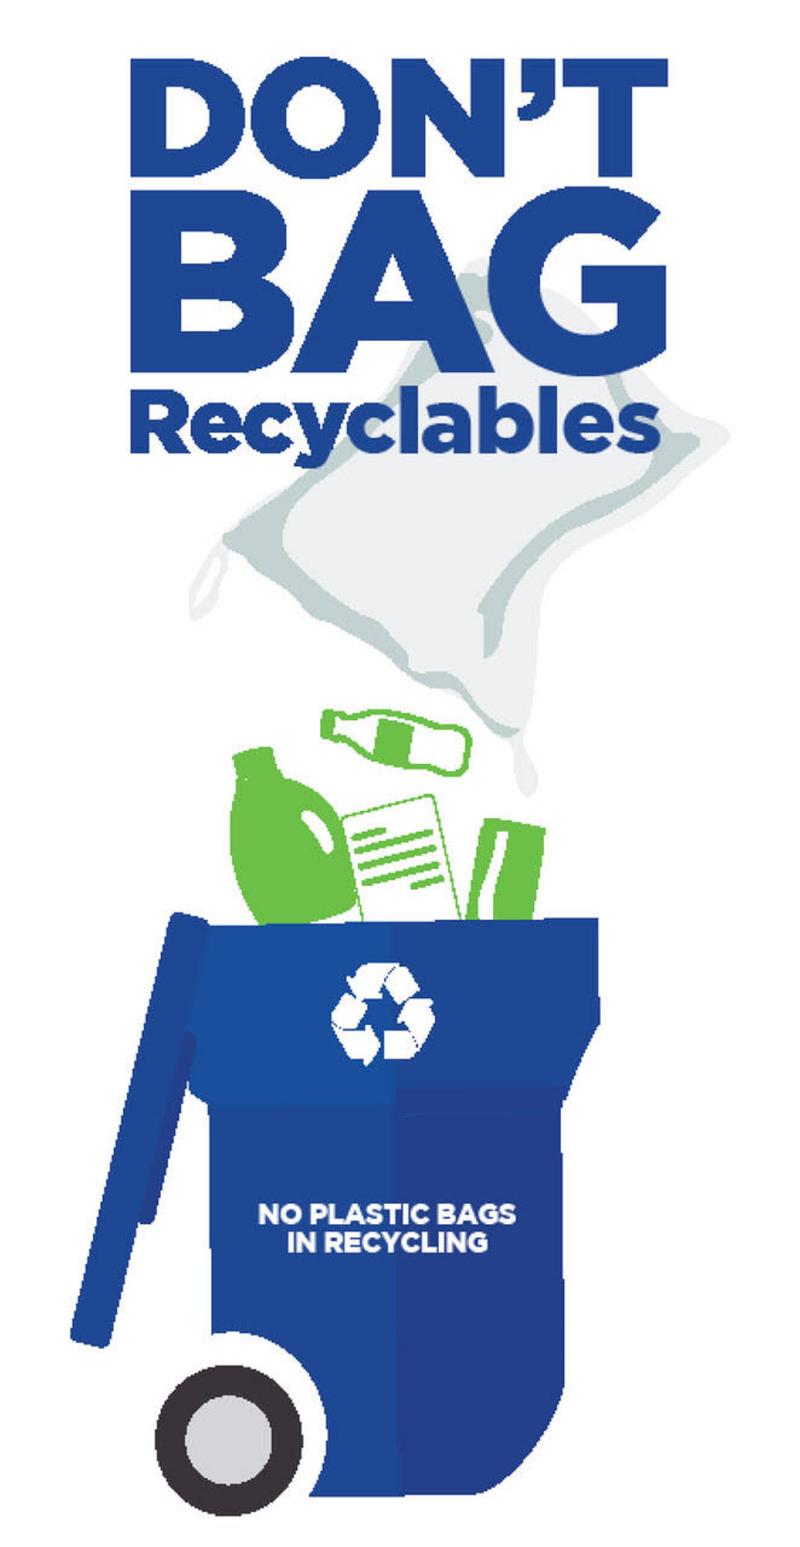 Keep it Simple: Don’t Bag Recyclables In Las Cruces | KRWG